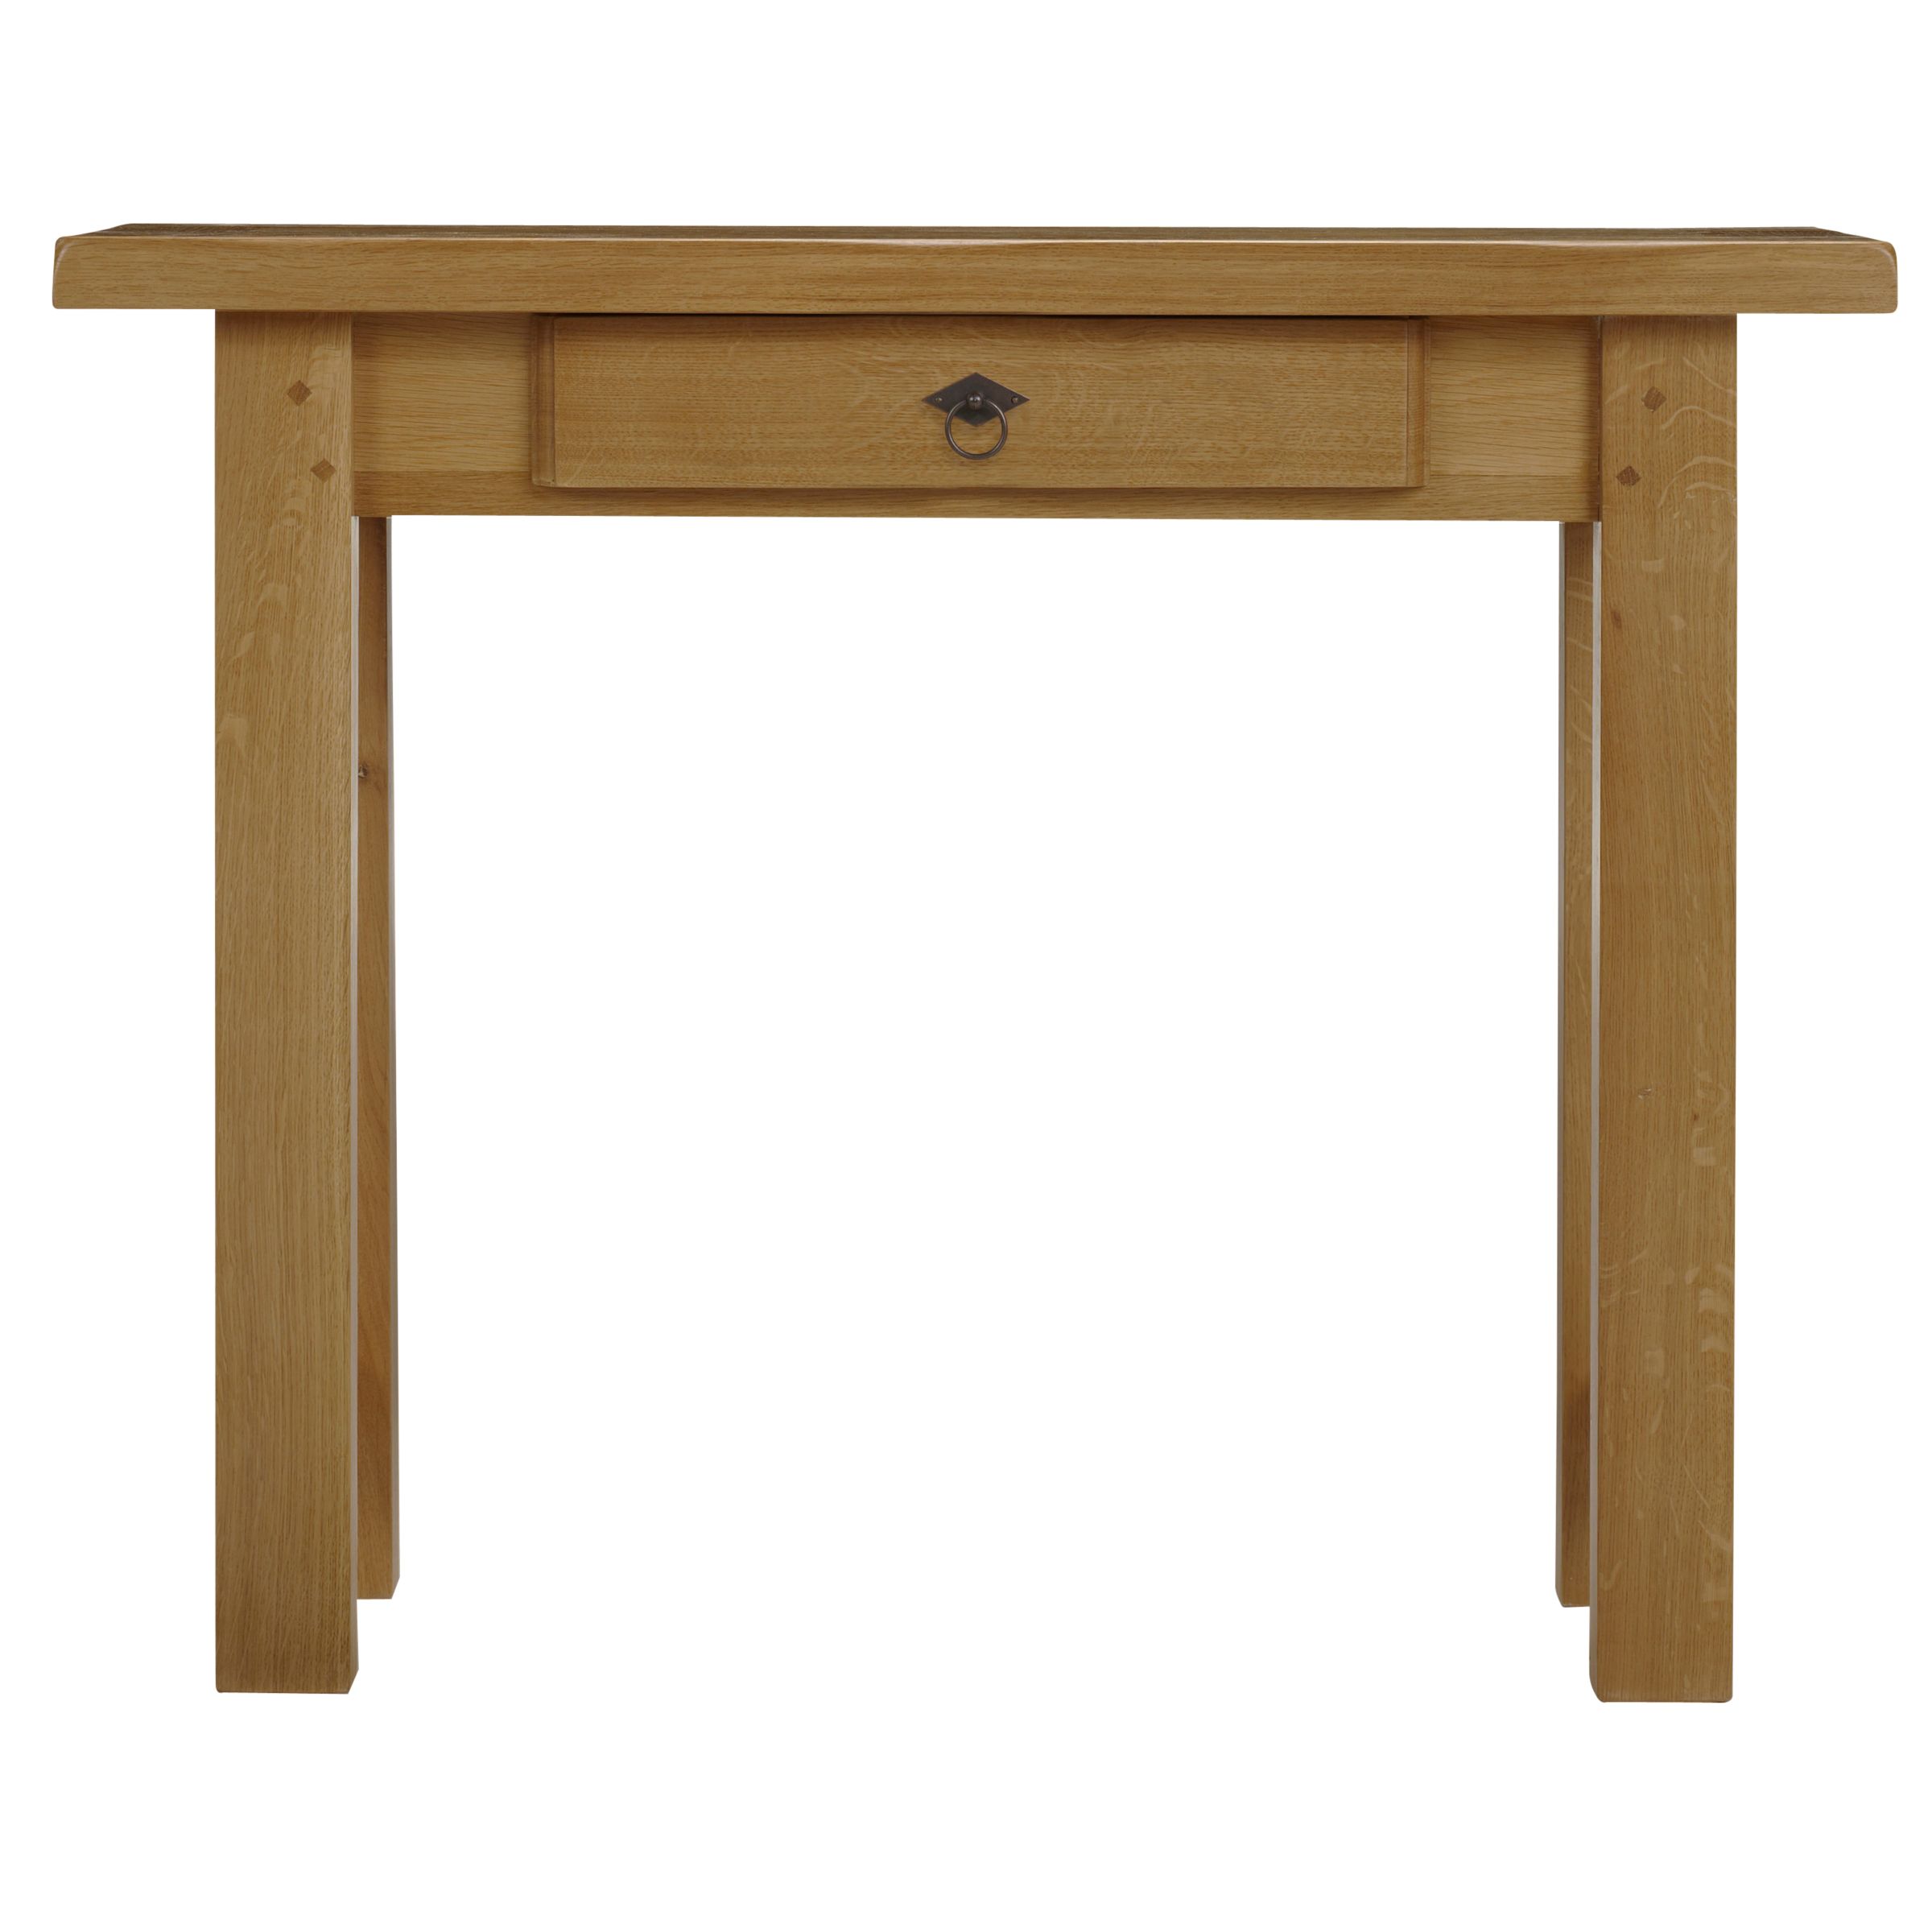 John Lewis Ardenne Console Table, Cognac at JohnLewis